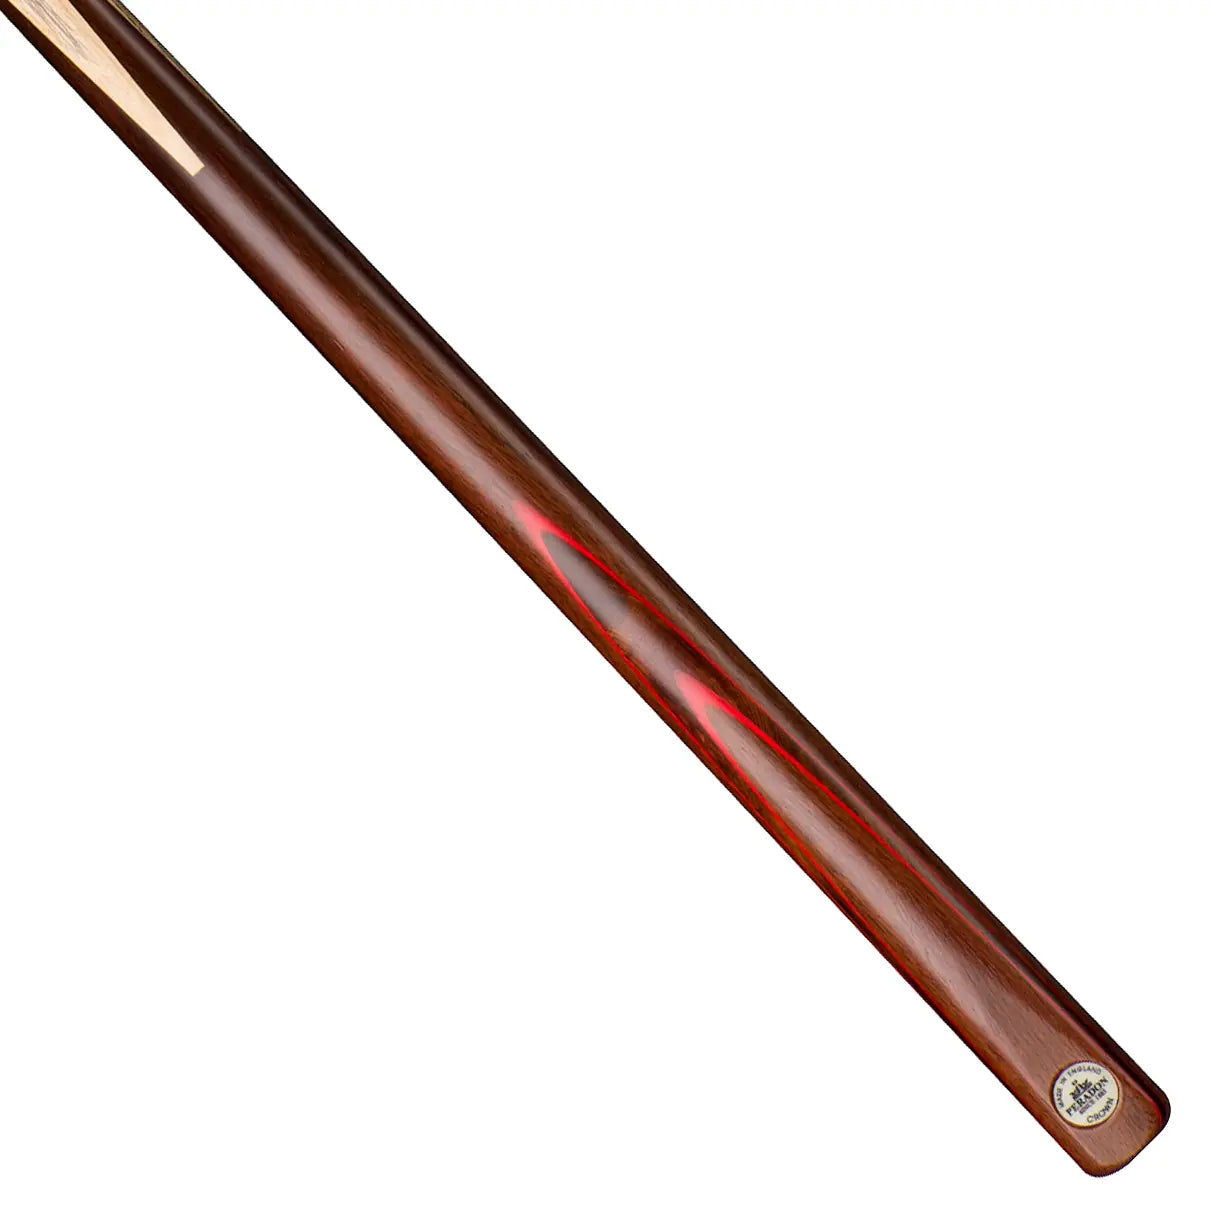 Peradon Crown Two Piece Snooker Cue. On angle view